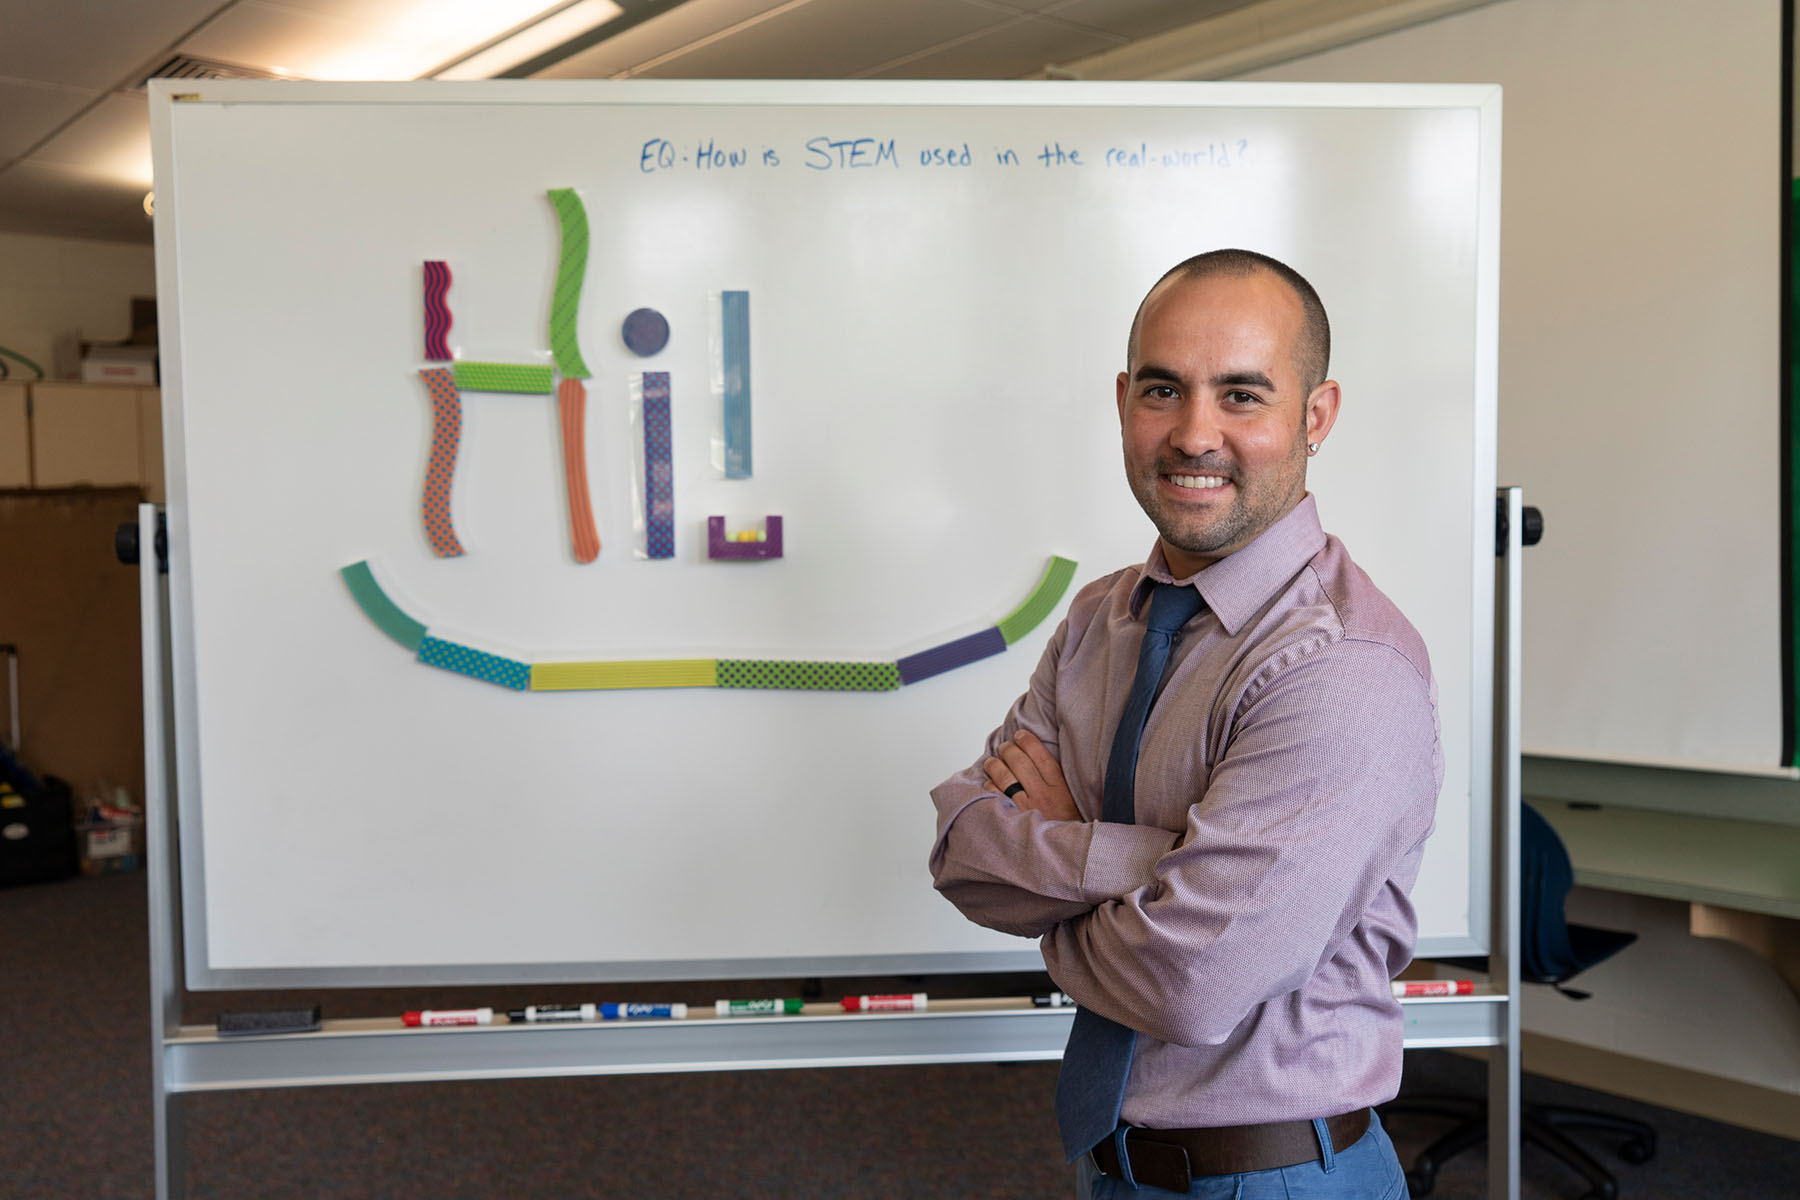 Teacher smiling in front of white board that says "hi!"